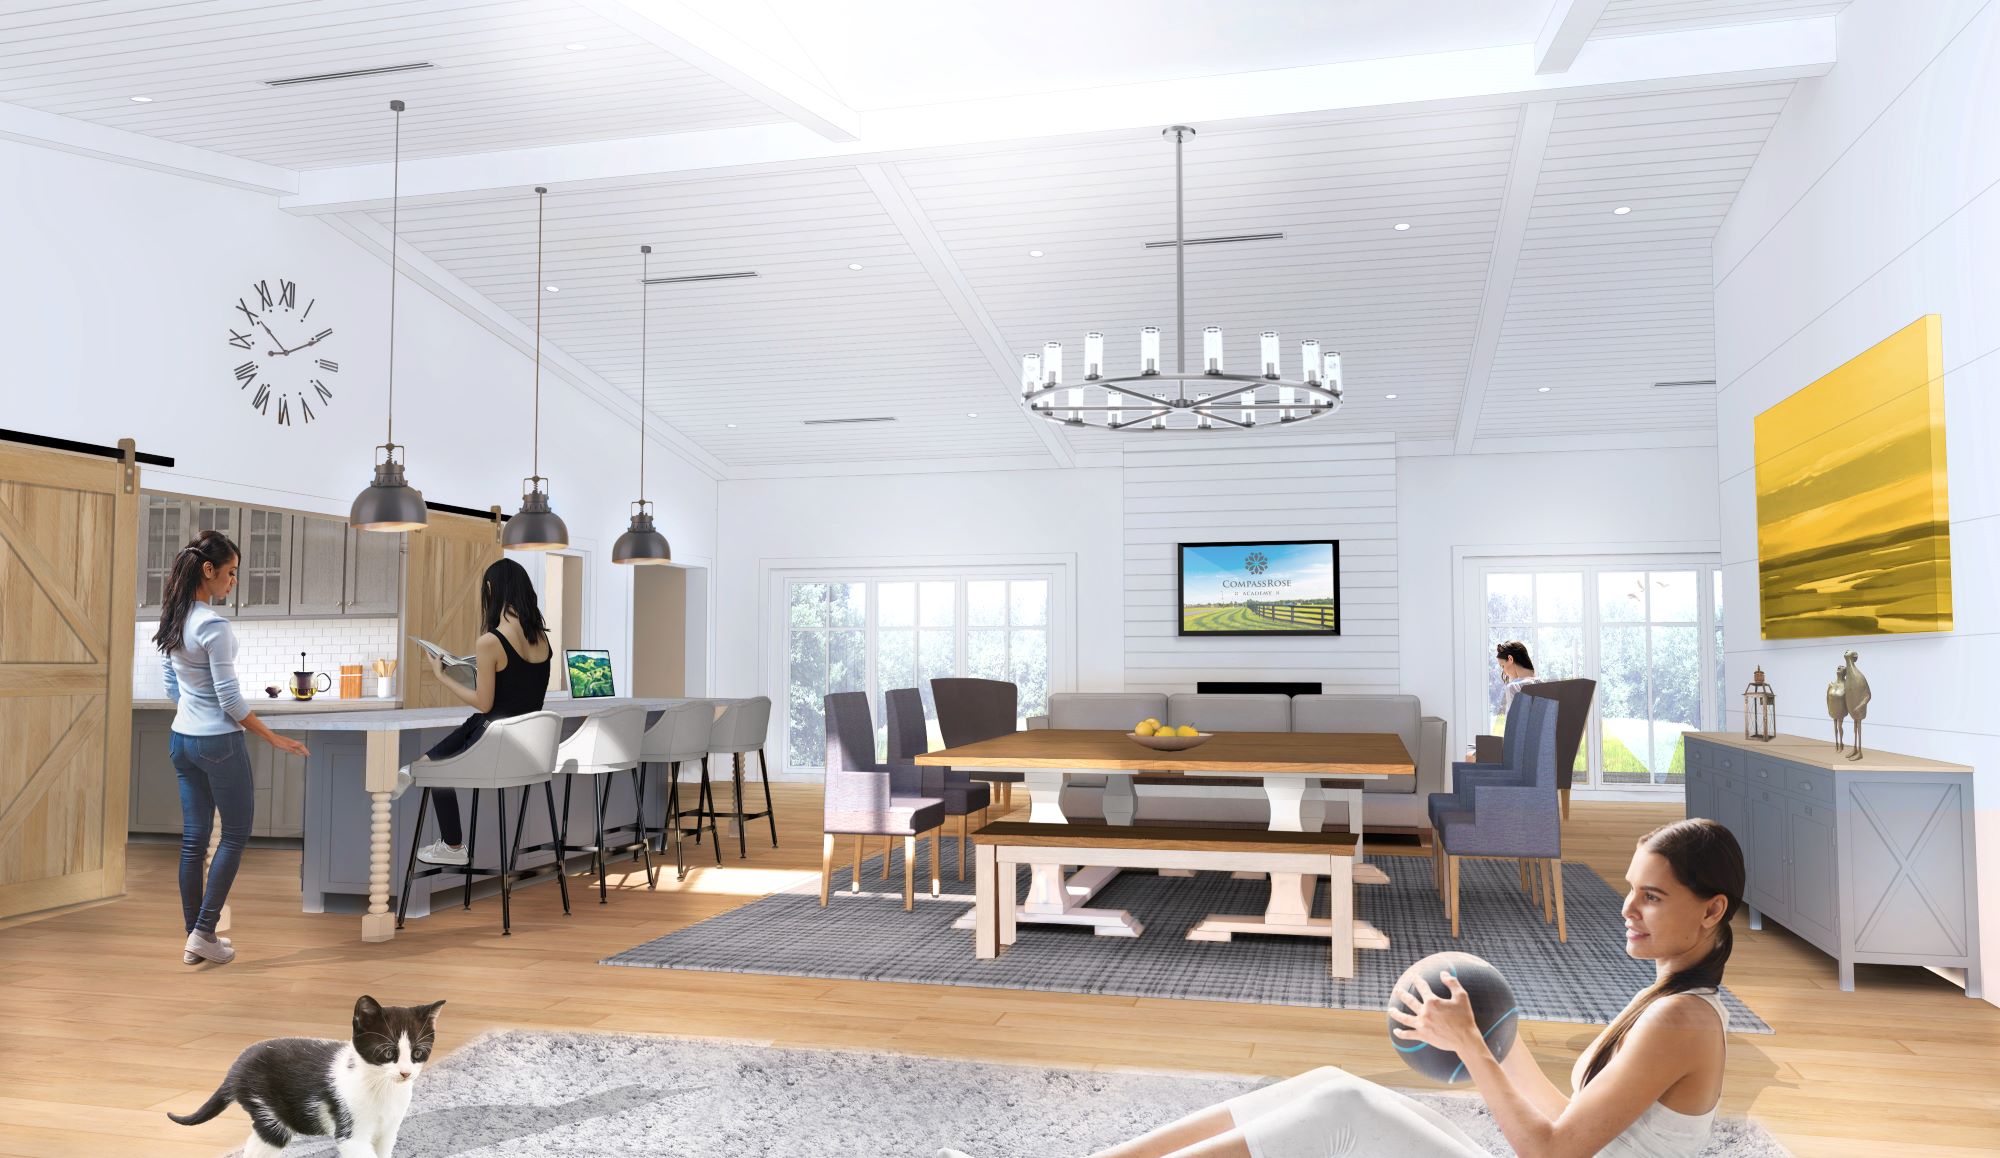 Compass Rose Academy household interior rendering